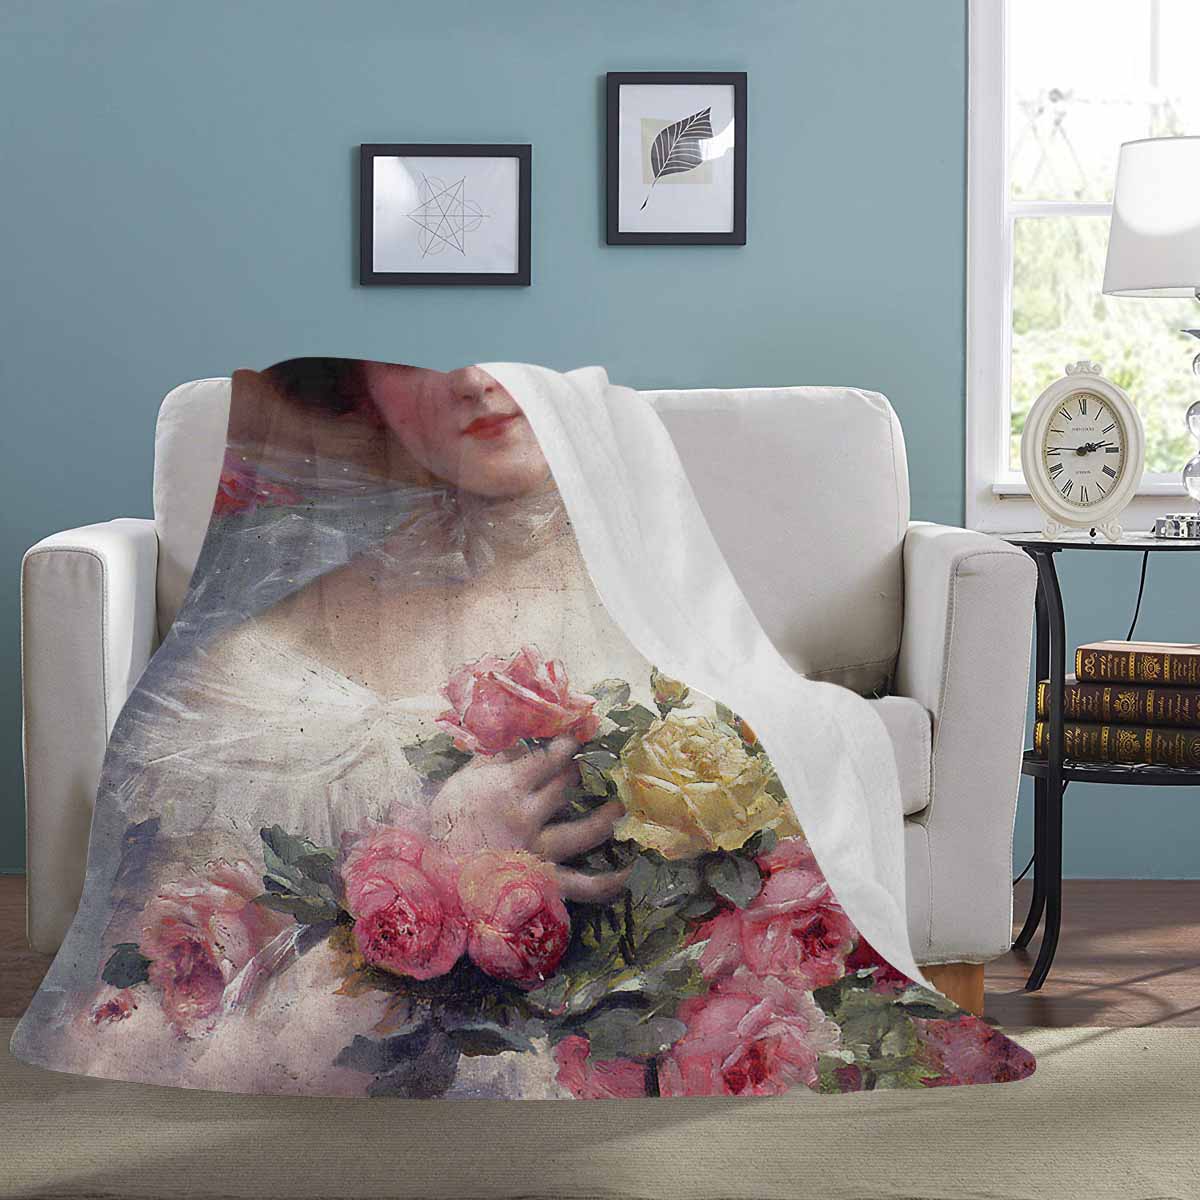 Victorian Lady Design BLANKET, LARGE 60 in x 80 in, BEAUTY WITH FLOWERS